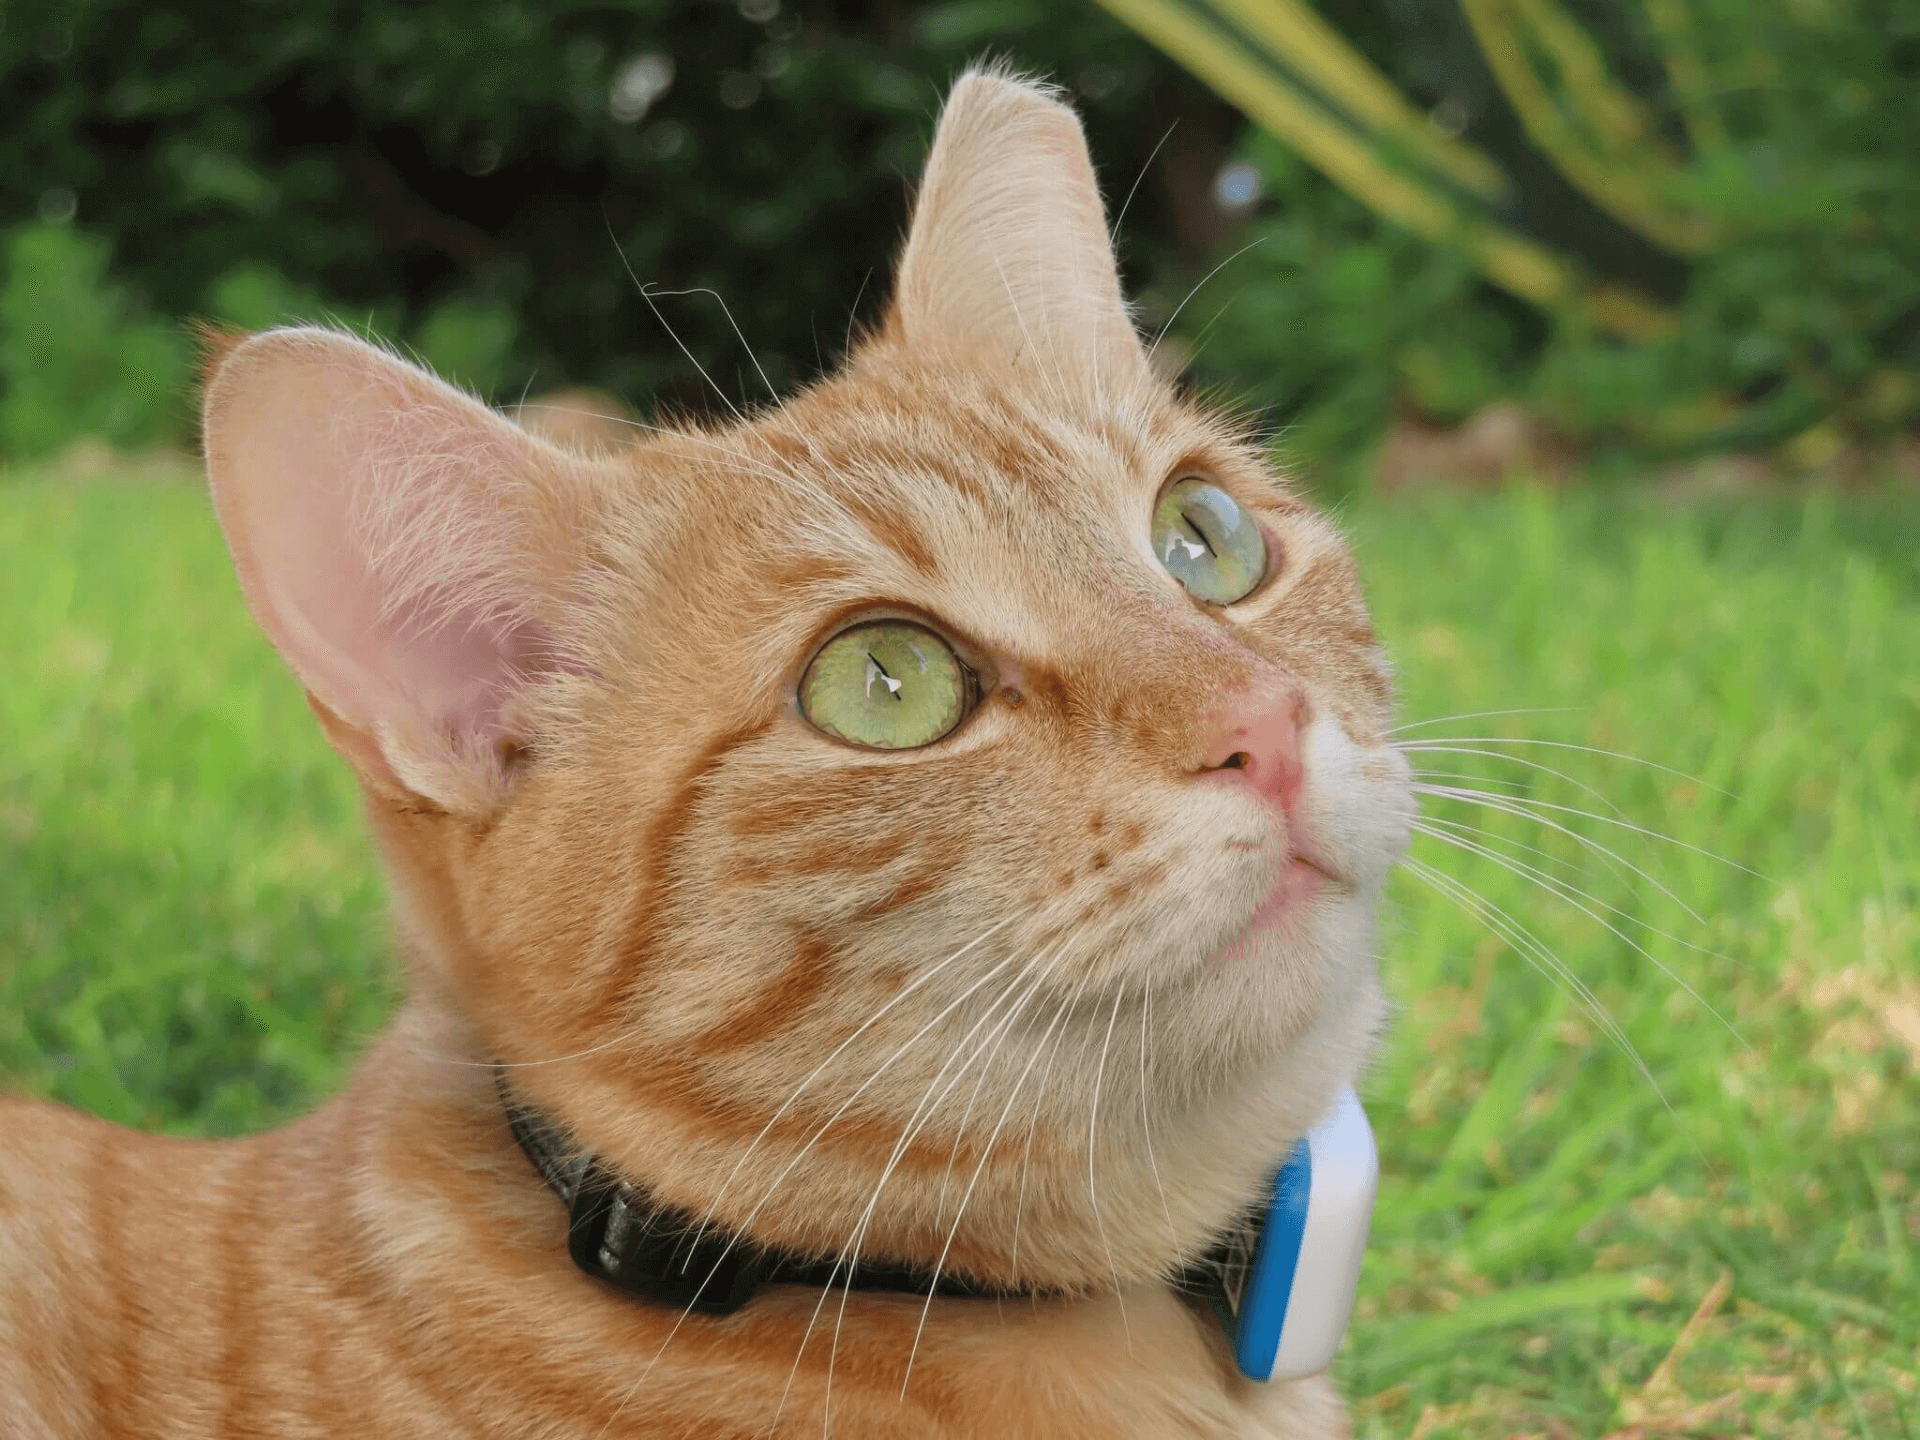 orange cat with green eyes looking upwards close up on face, grass in background